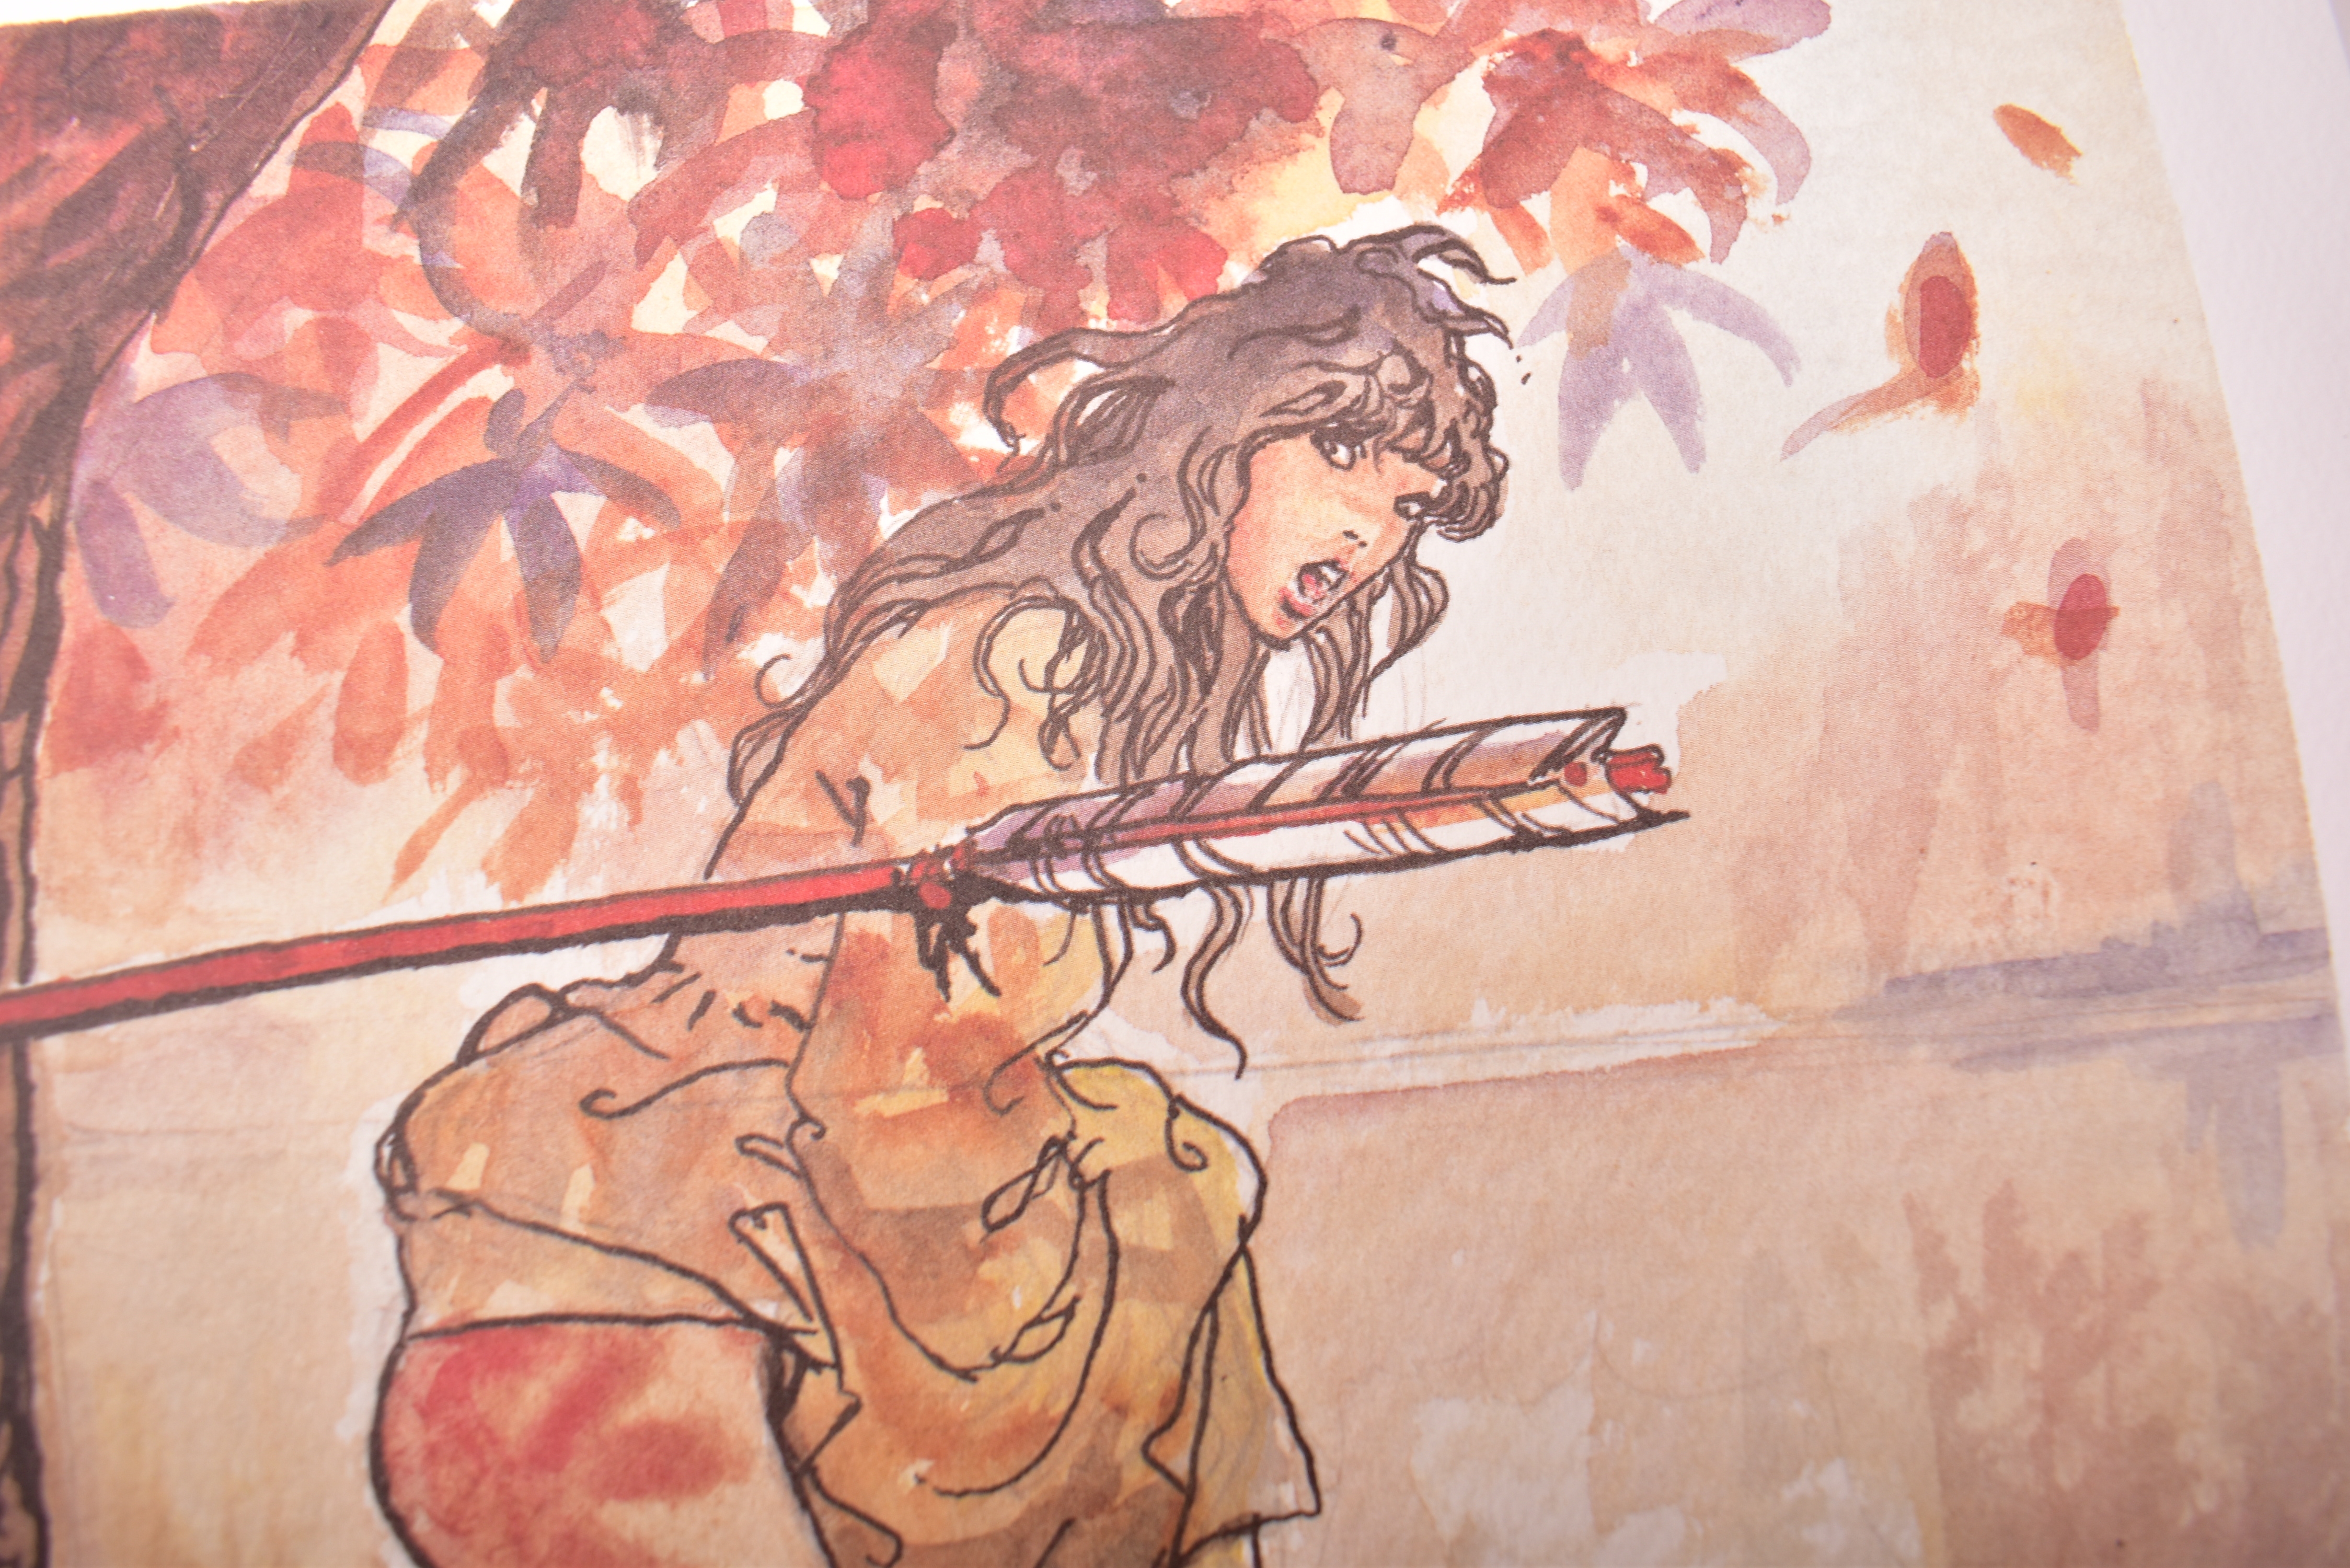 Artwork by Milo Manara, INDIAN SUMMER, Made of Colourprint on paper